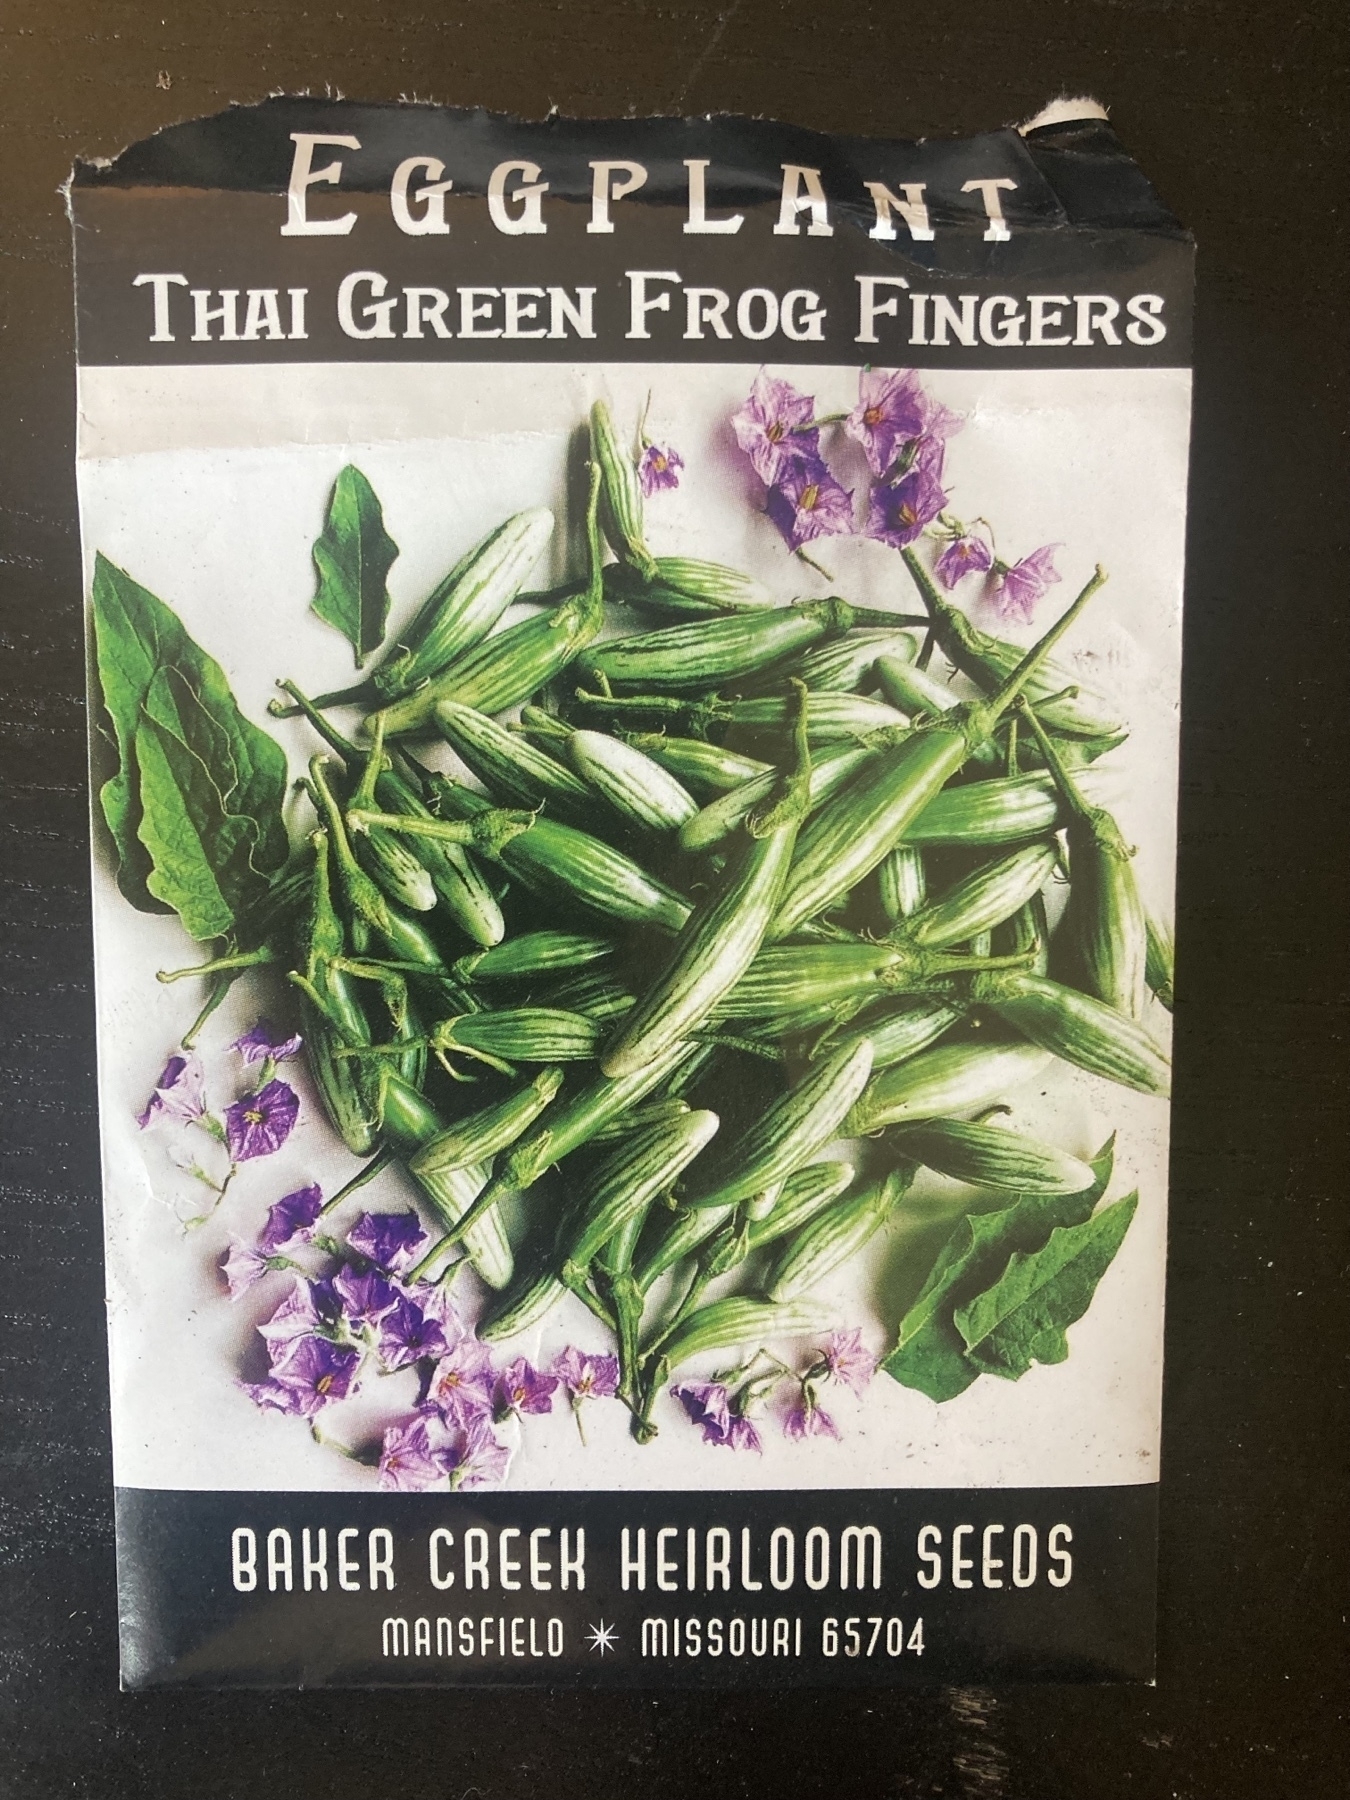 packet of seeds labeled Eggplant: Thai Green Frog Fingers